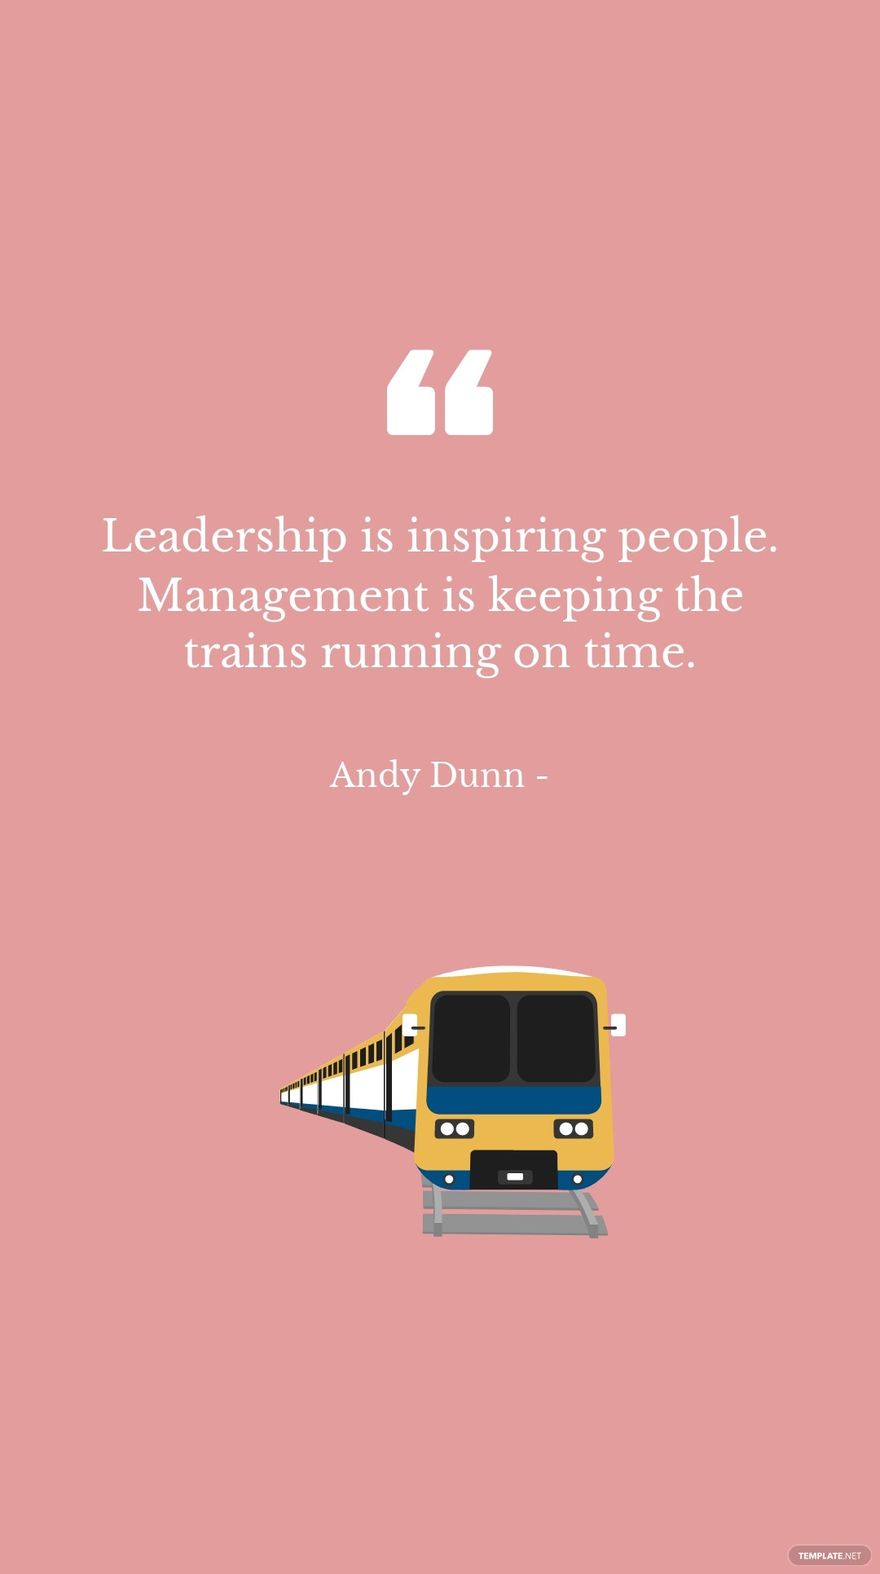 Free Andy Dunn - Leadership is inspiring people. Management is keeping the trains running on time. in JPG